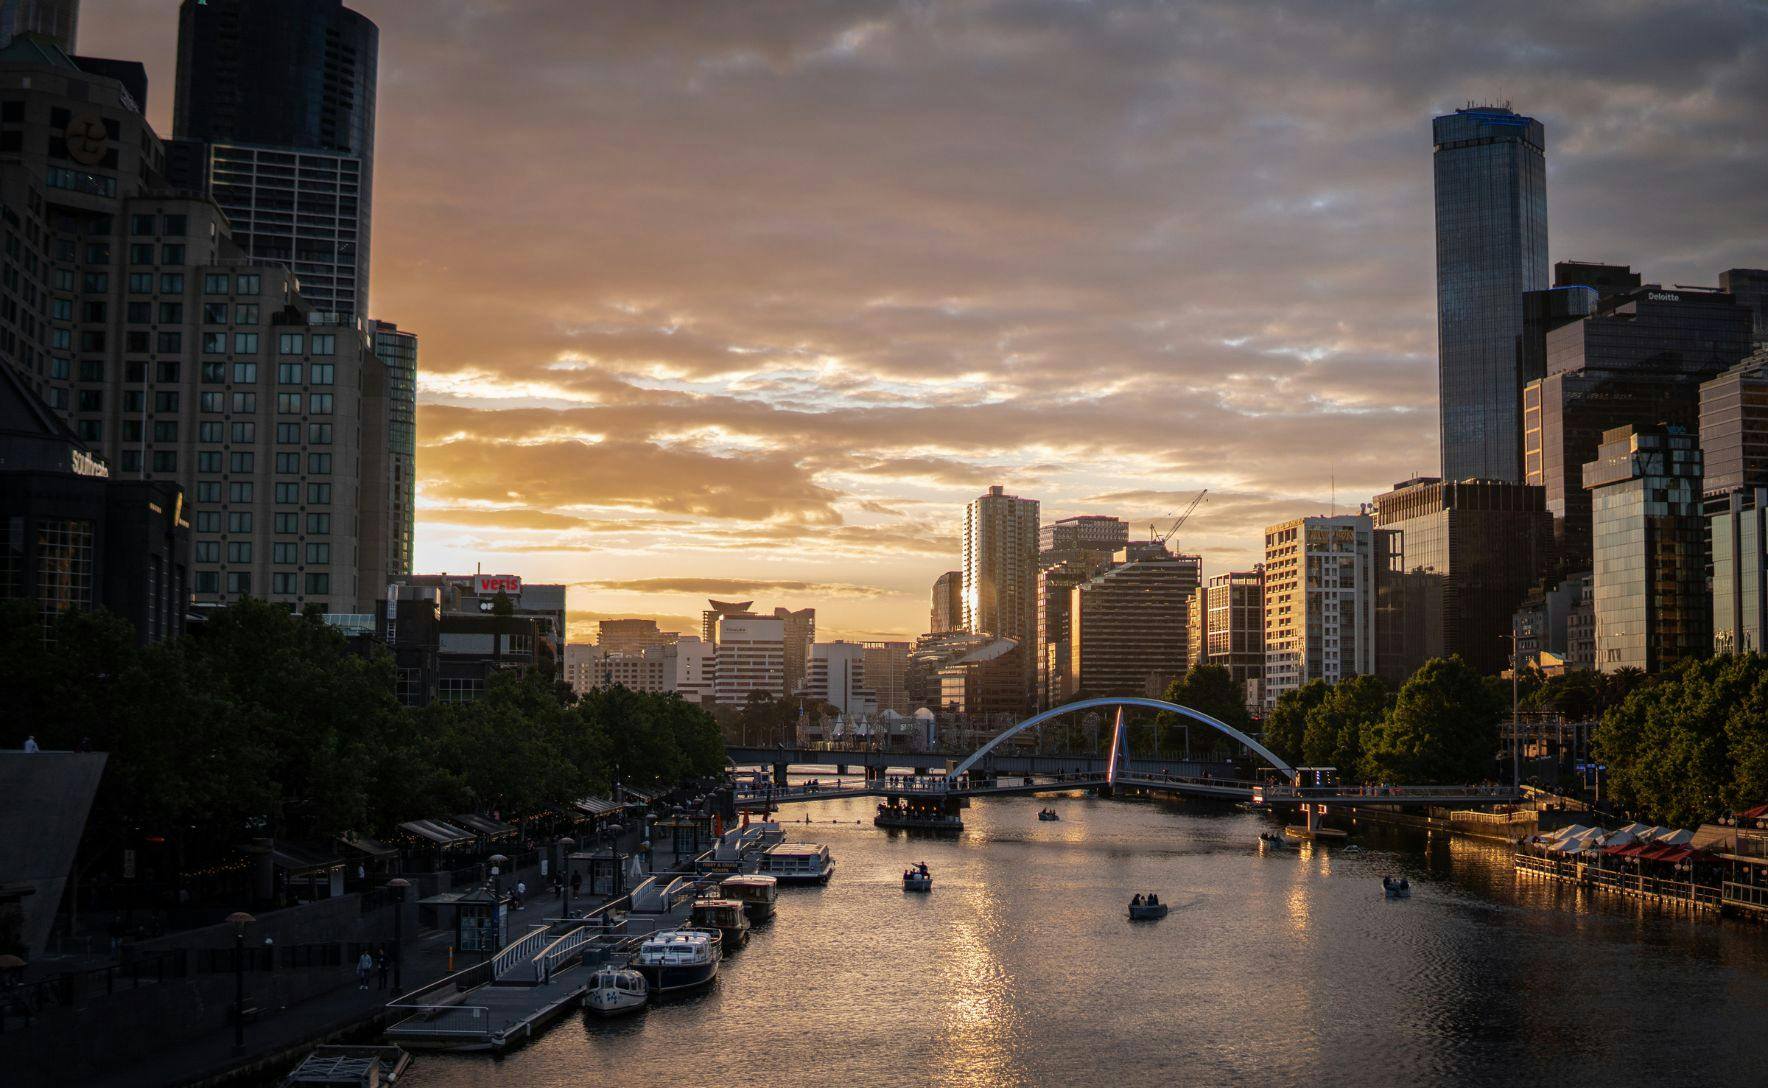 A shot of the Yarra river in Melbourne, with city buildings along both sides. There are boats in the river, and the sky is the orange of a sunset.